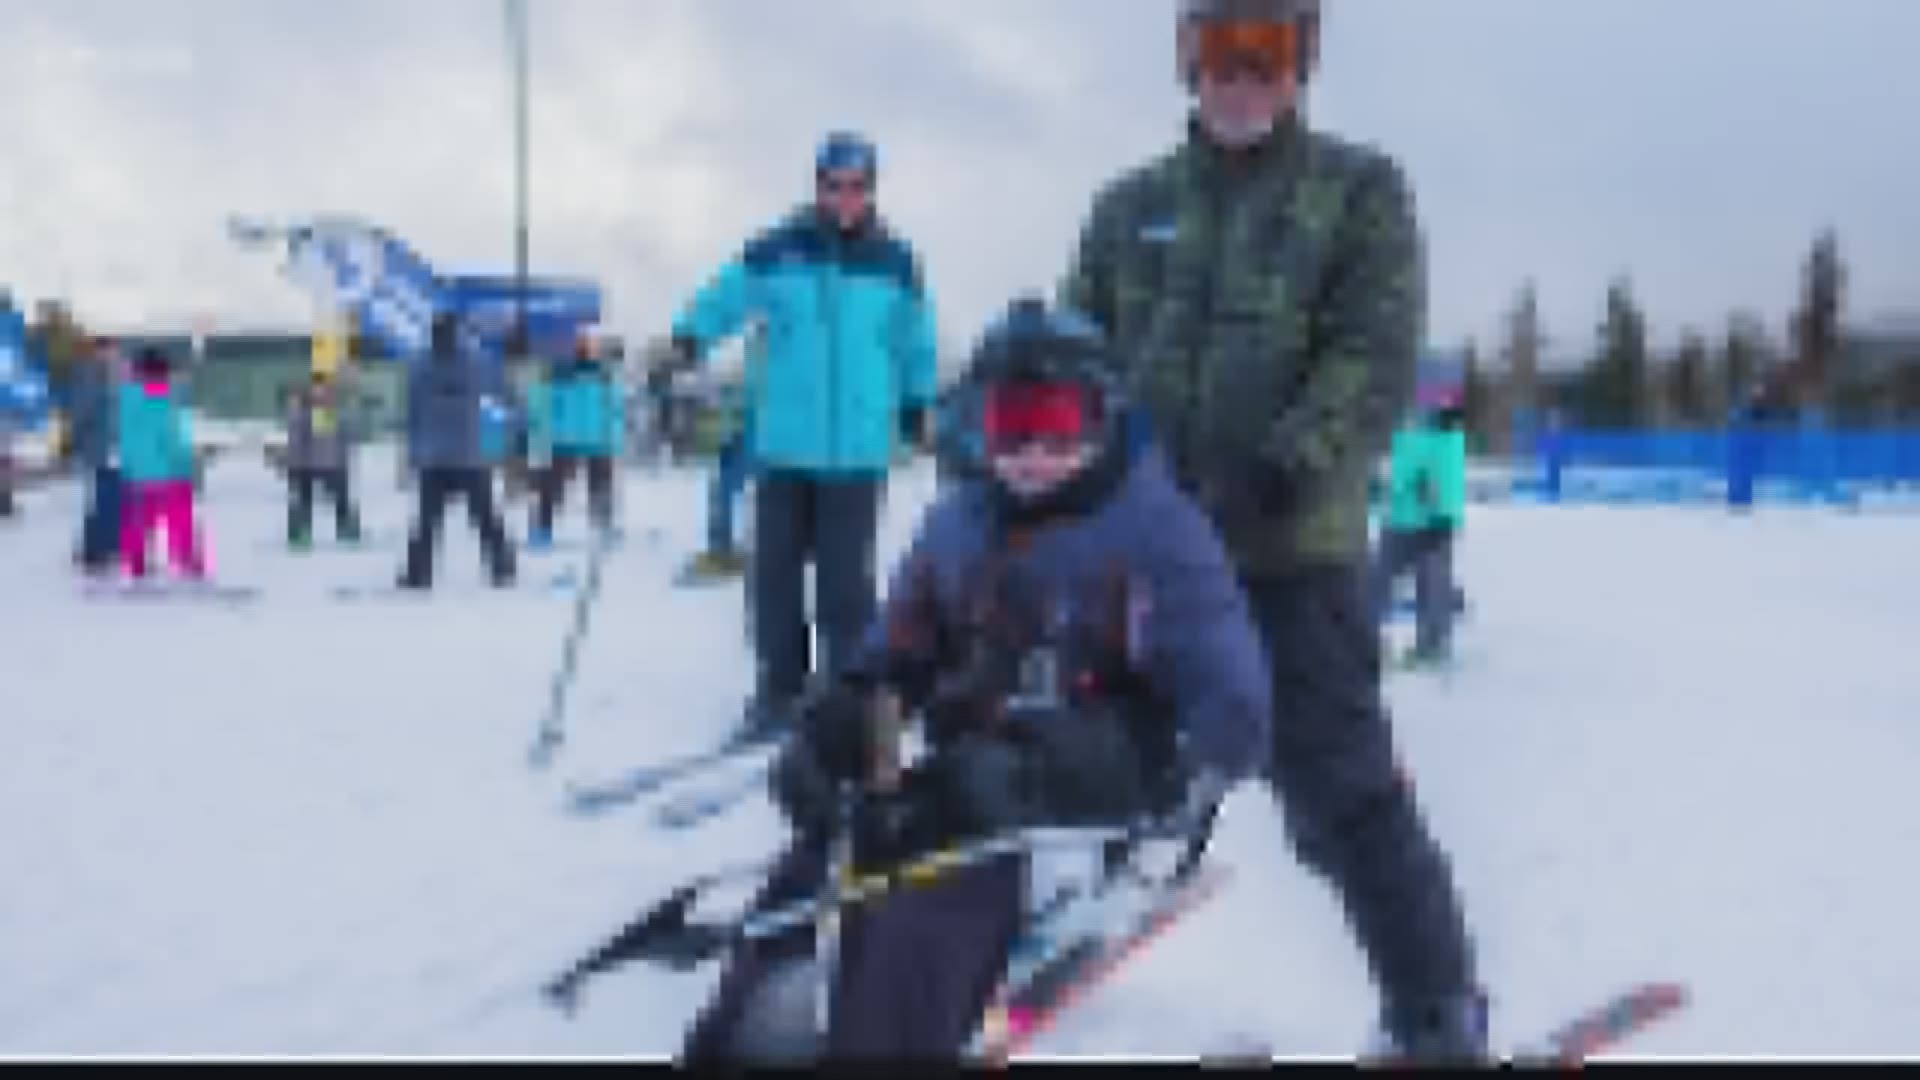 Therapeutic Recreation Services gives people living with disabilities to participate in winter sports.